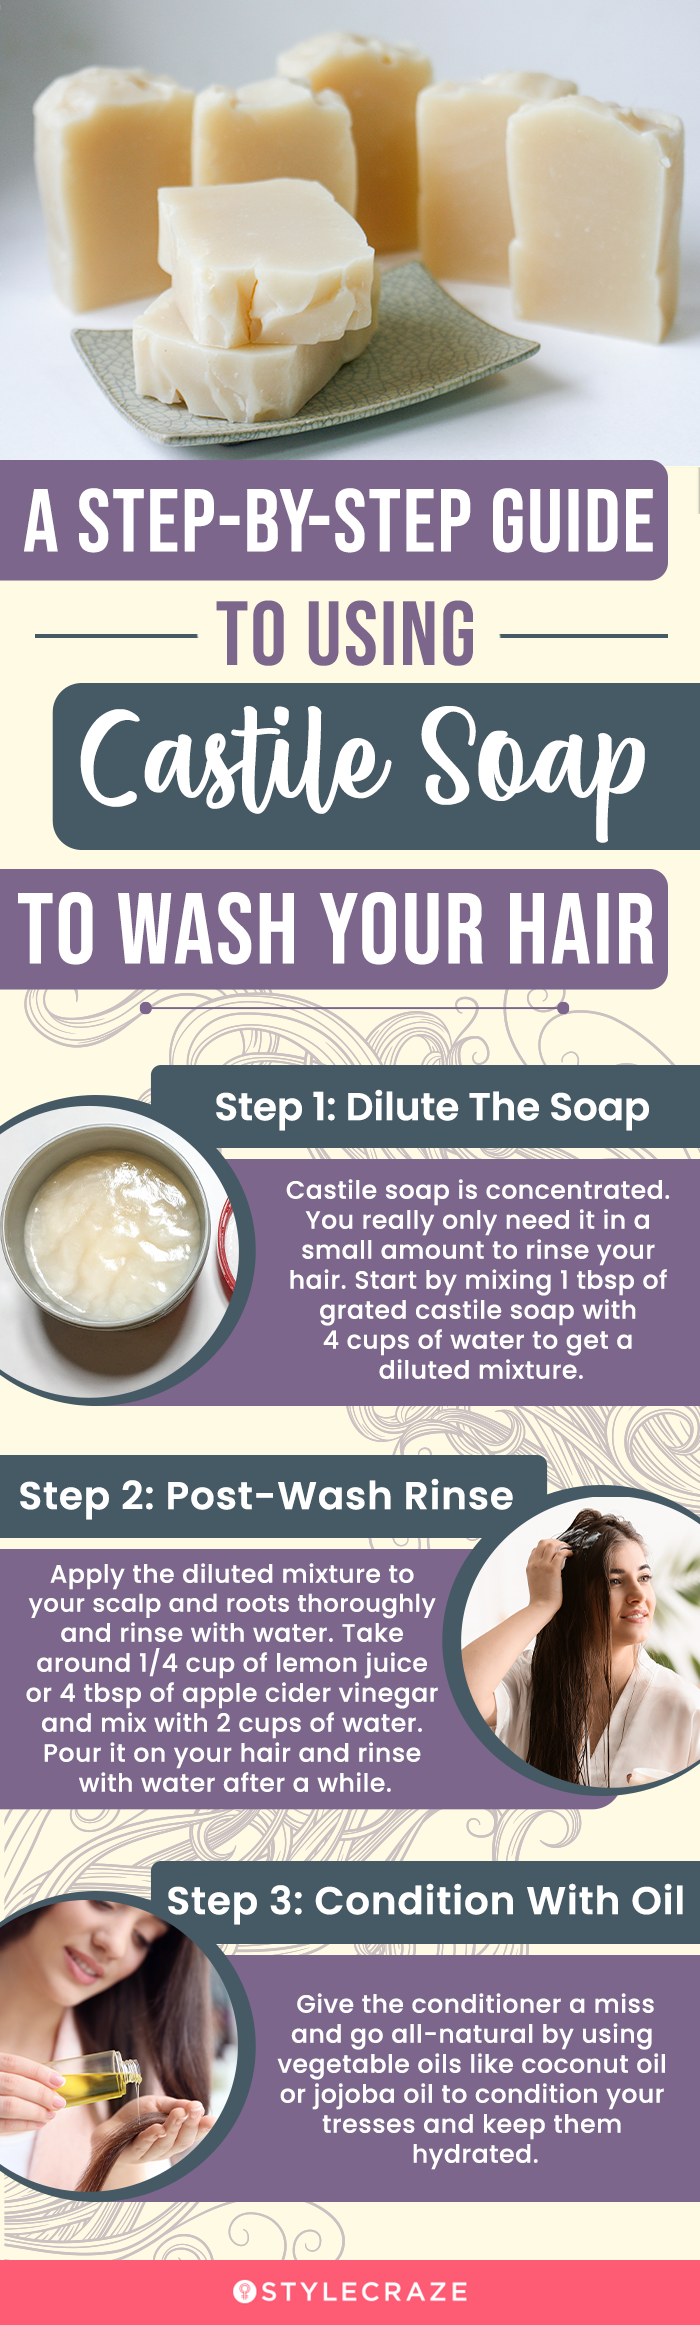 a step by step guide to using castile soap to wash your hair (infographic)